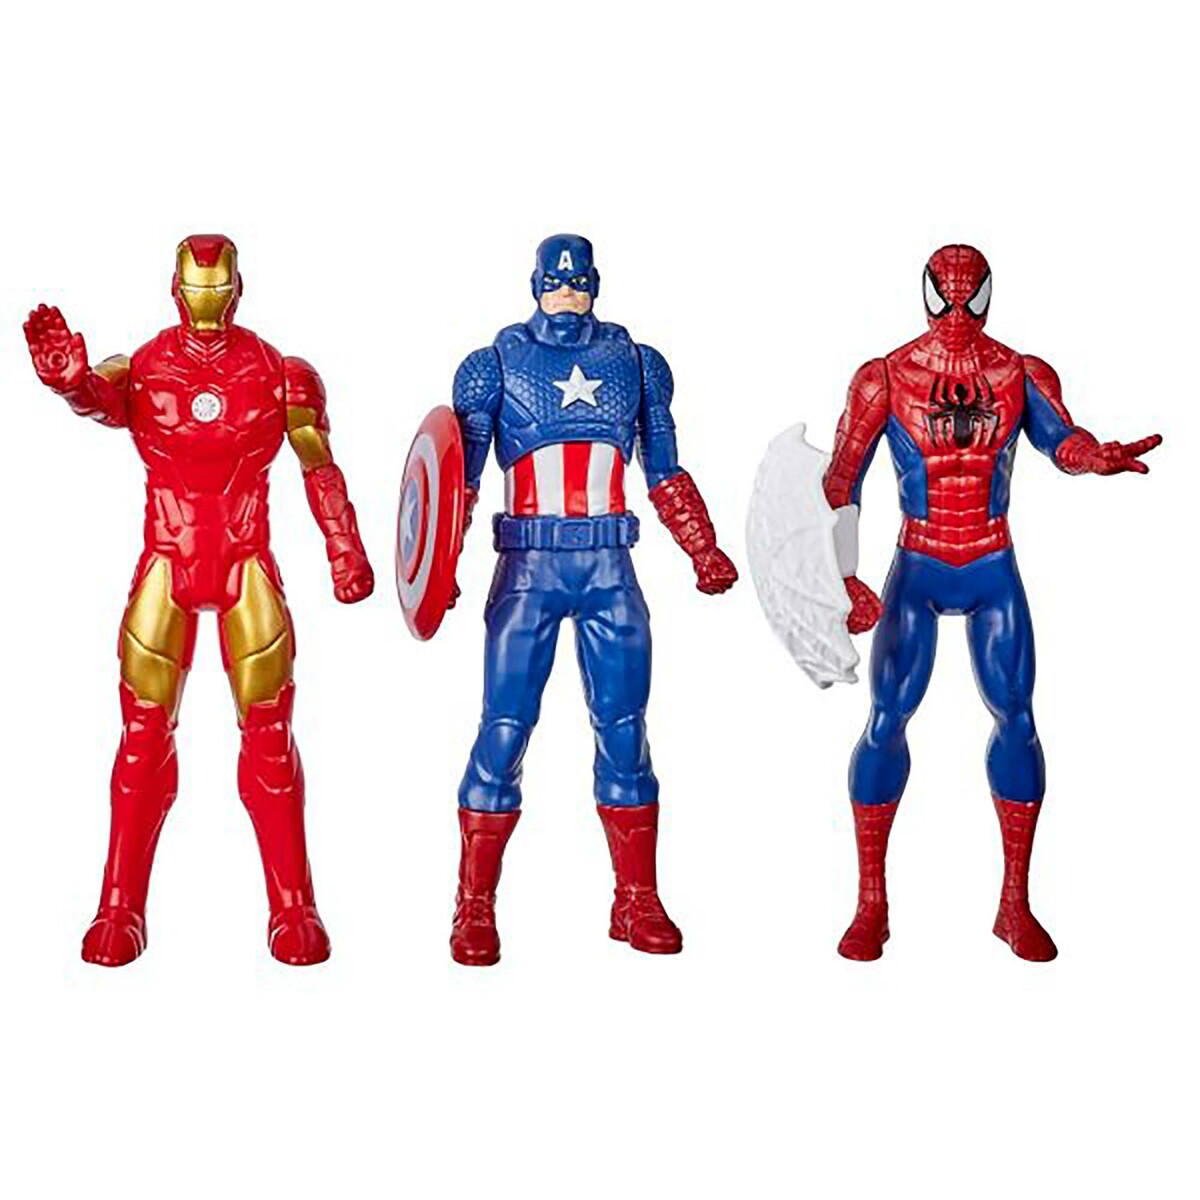 Marvel Action Figure Toy 3-Pack, 6-inch Figures, Iron Man, Spider-Man, Captain America, F13945L